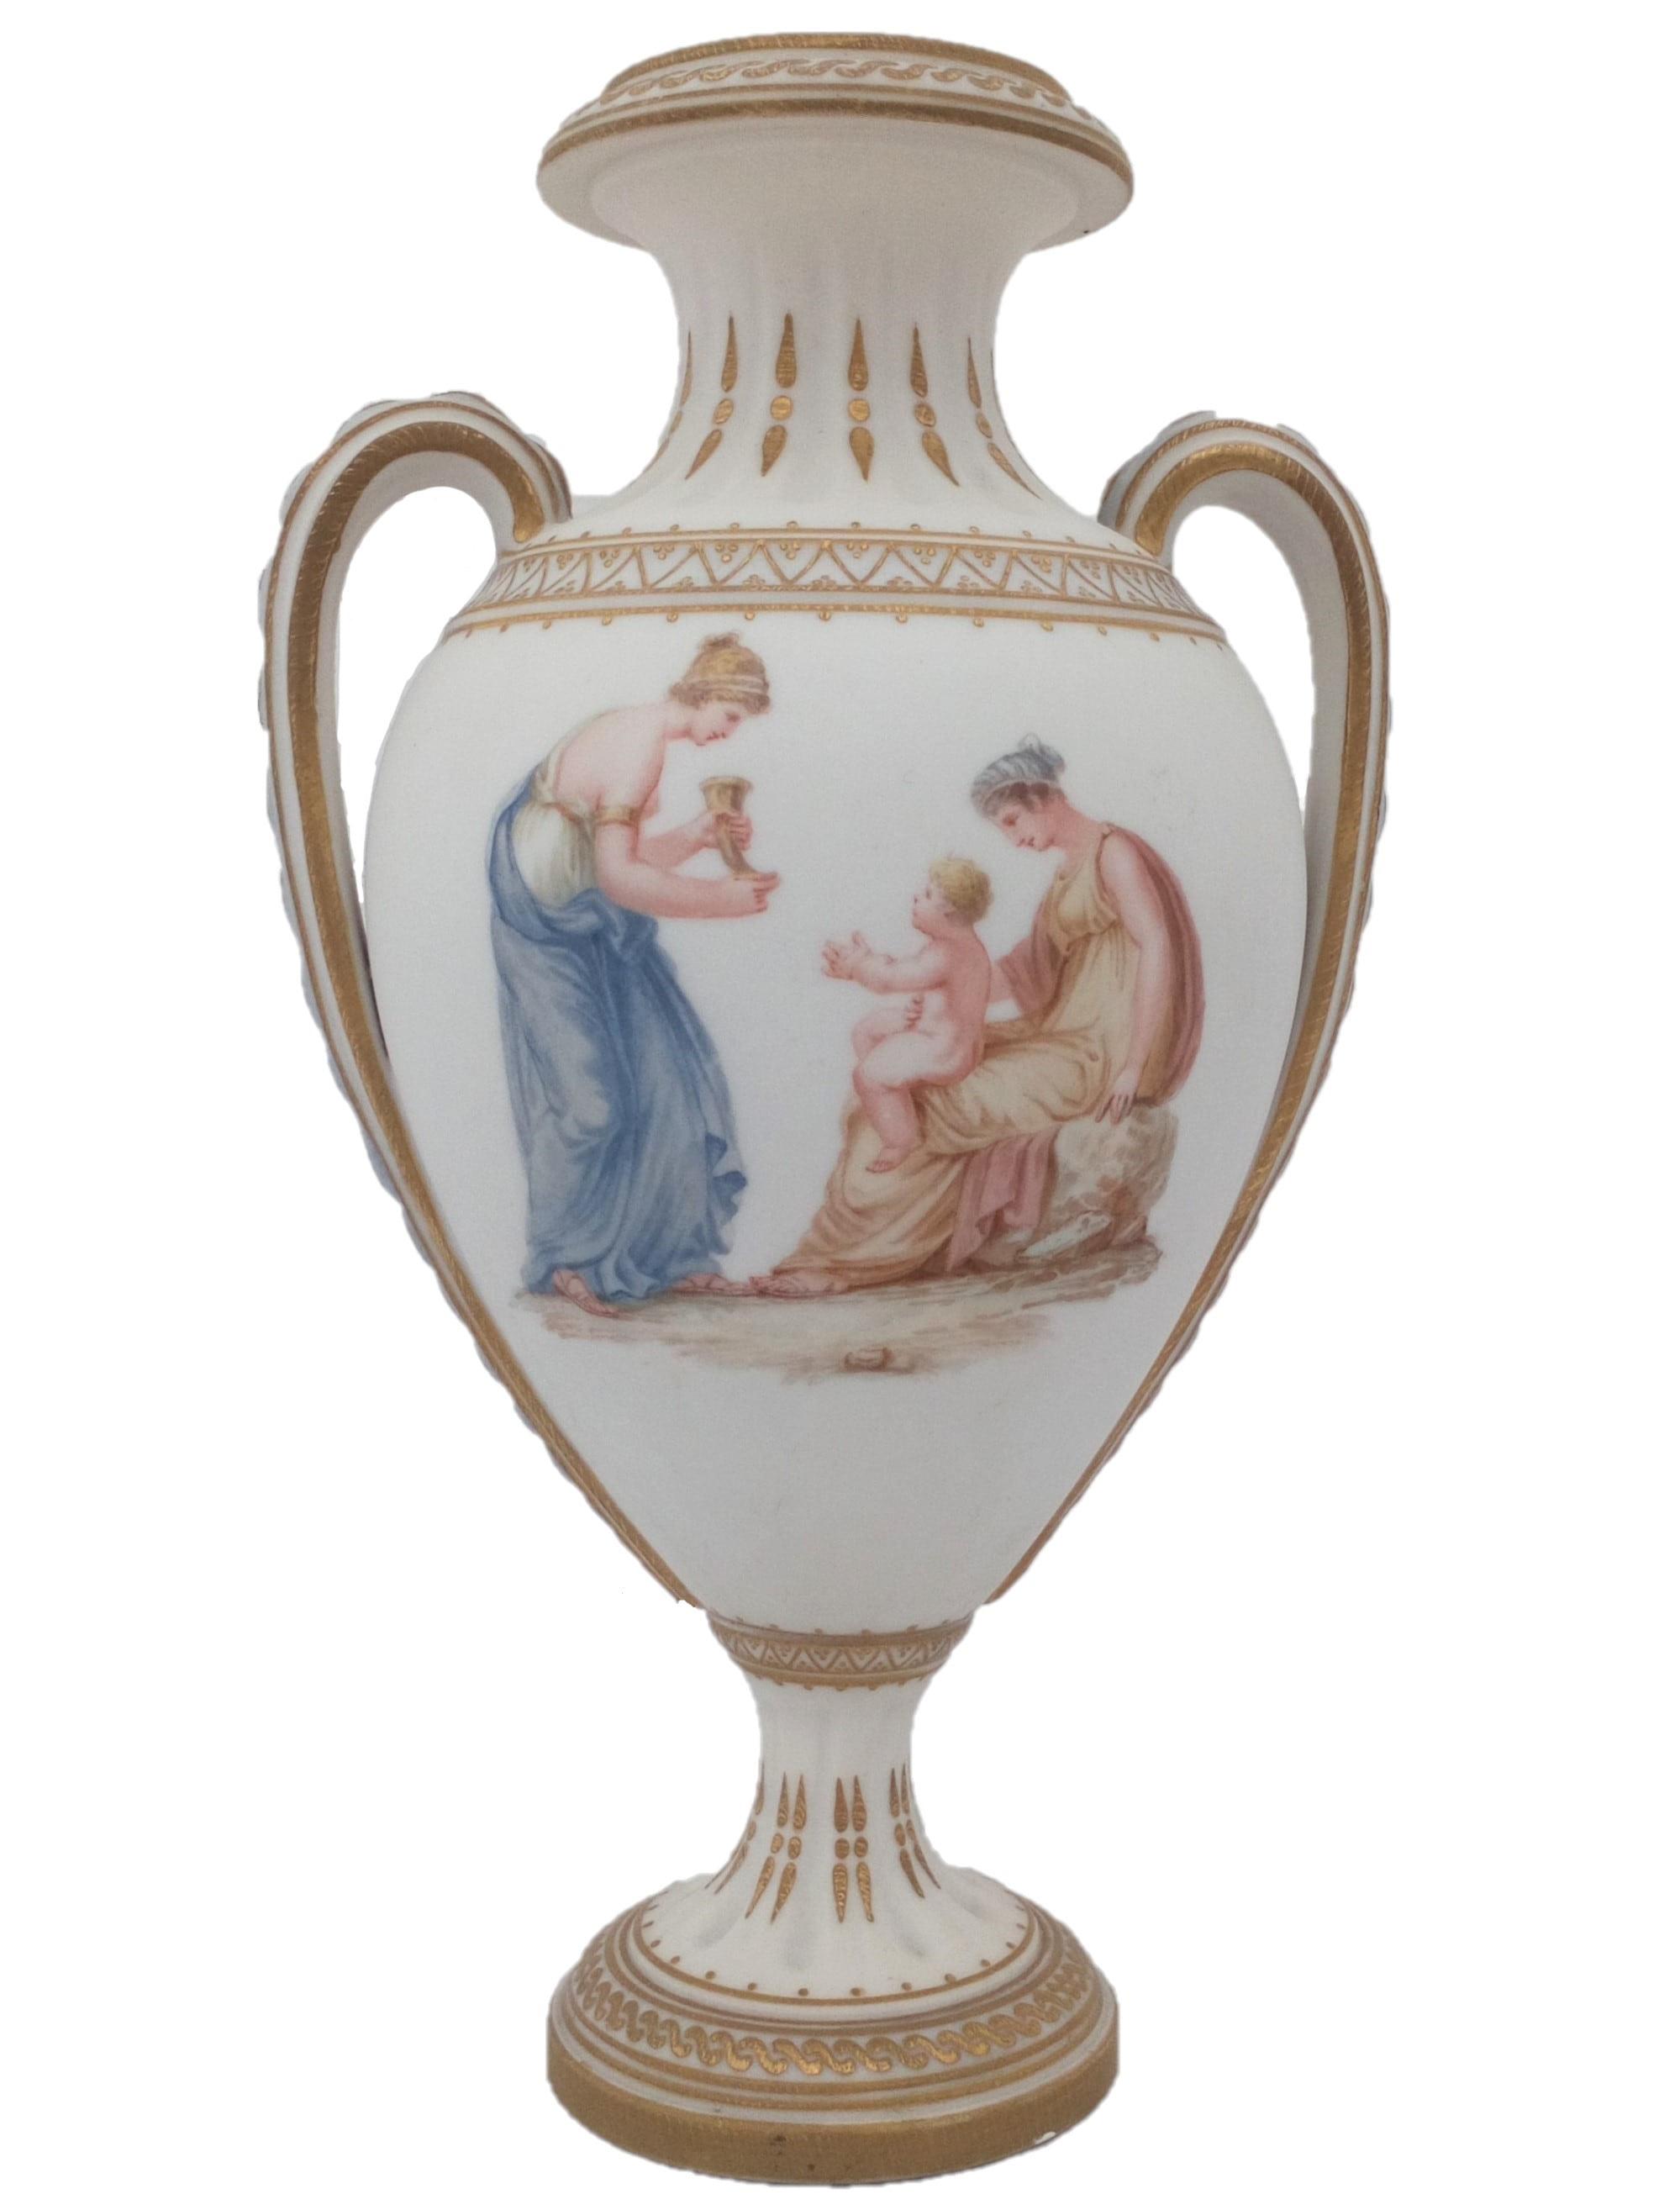 An antique Ceramic and Crystal Palace Art Union parian porcelain vase beautifully hand painted classical Roman figures impressed Hunter and dated 1881